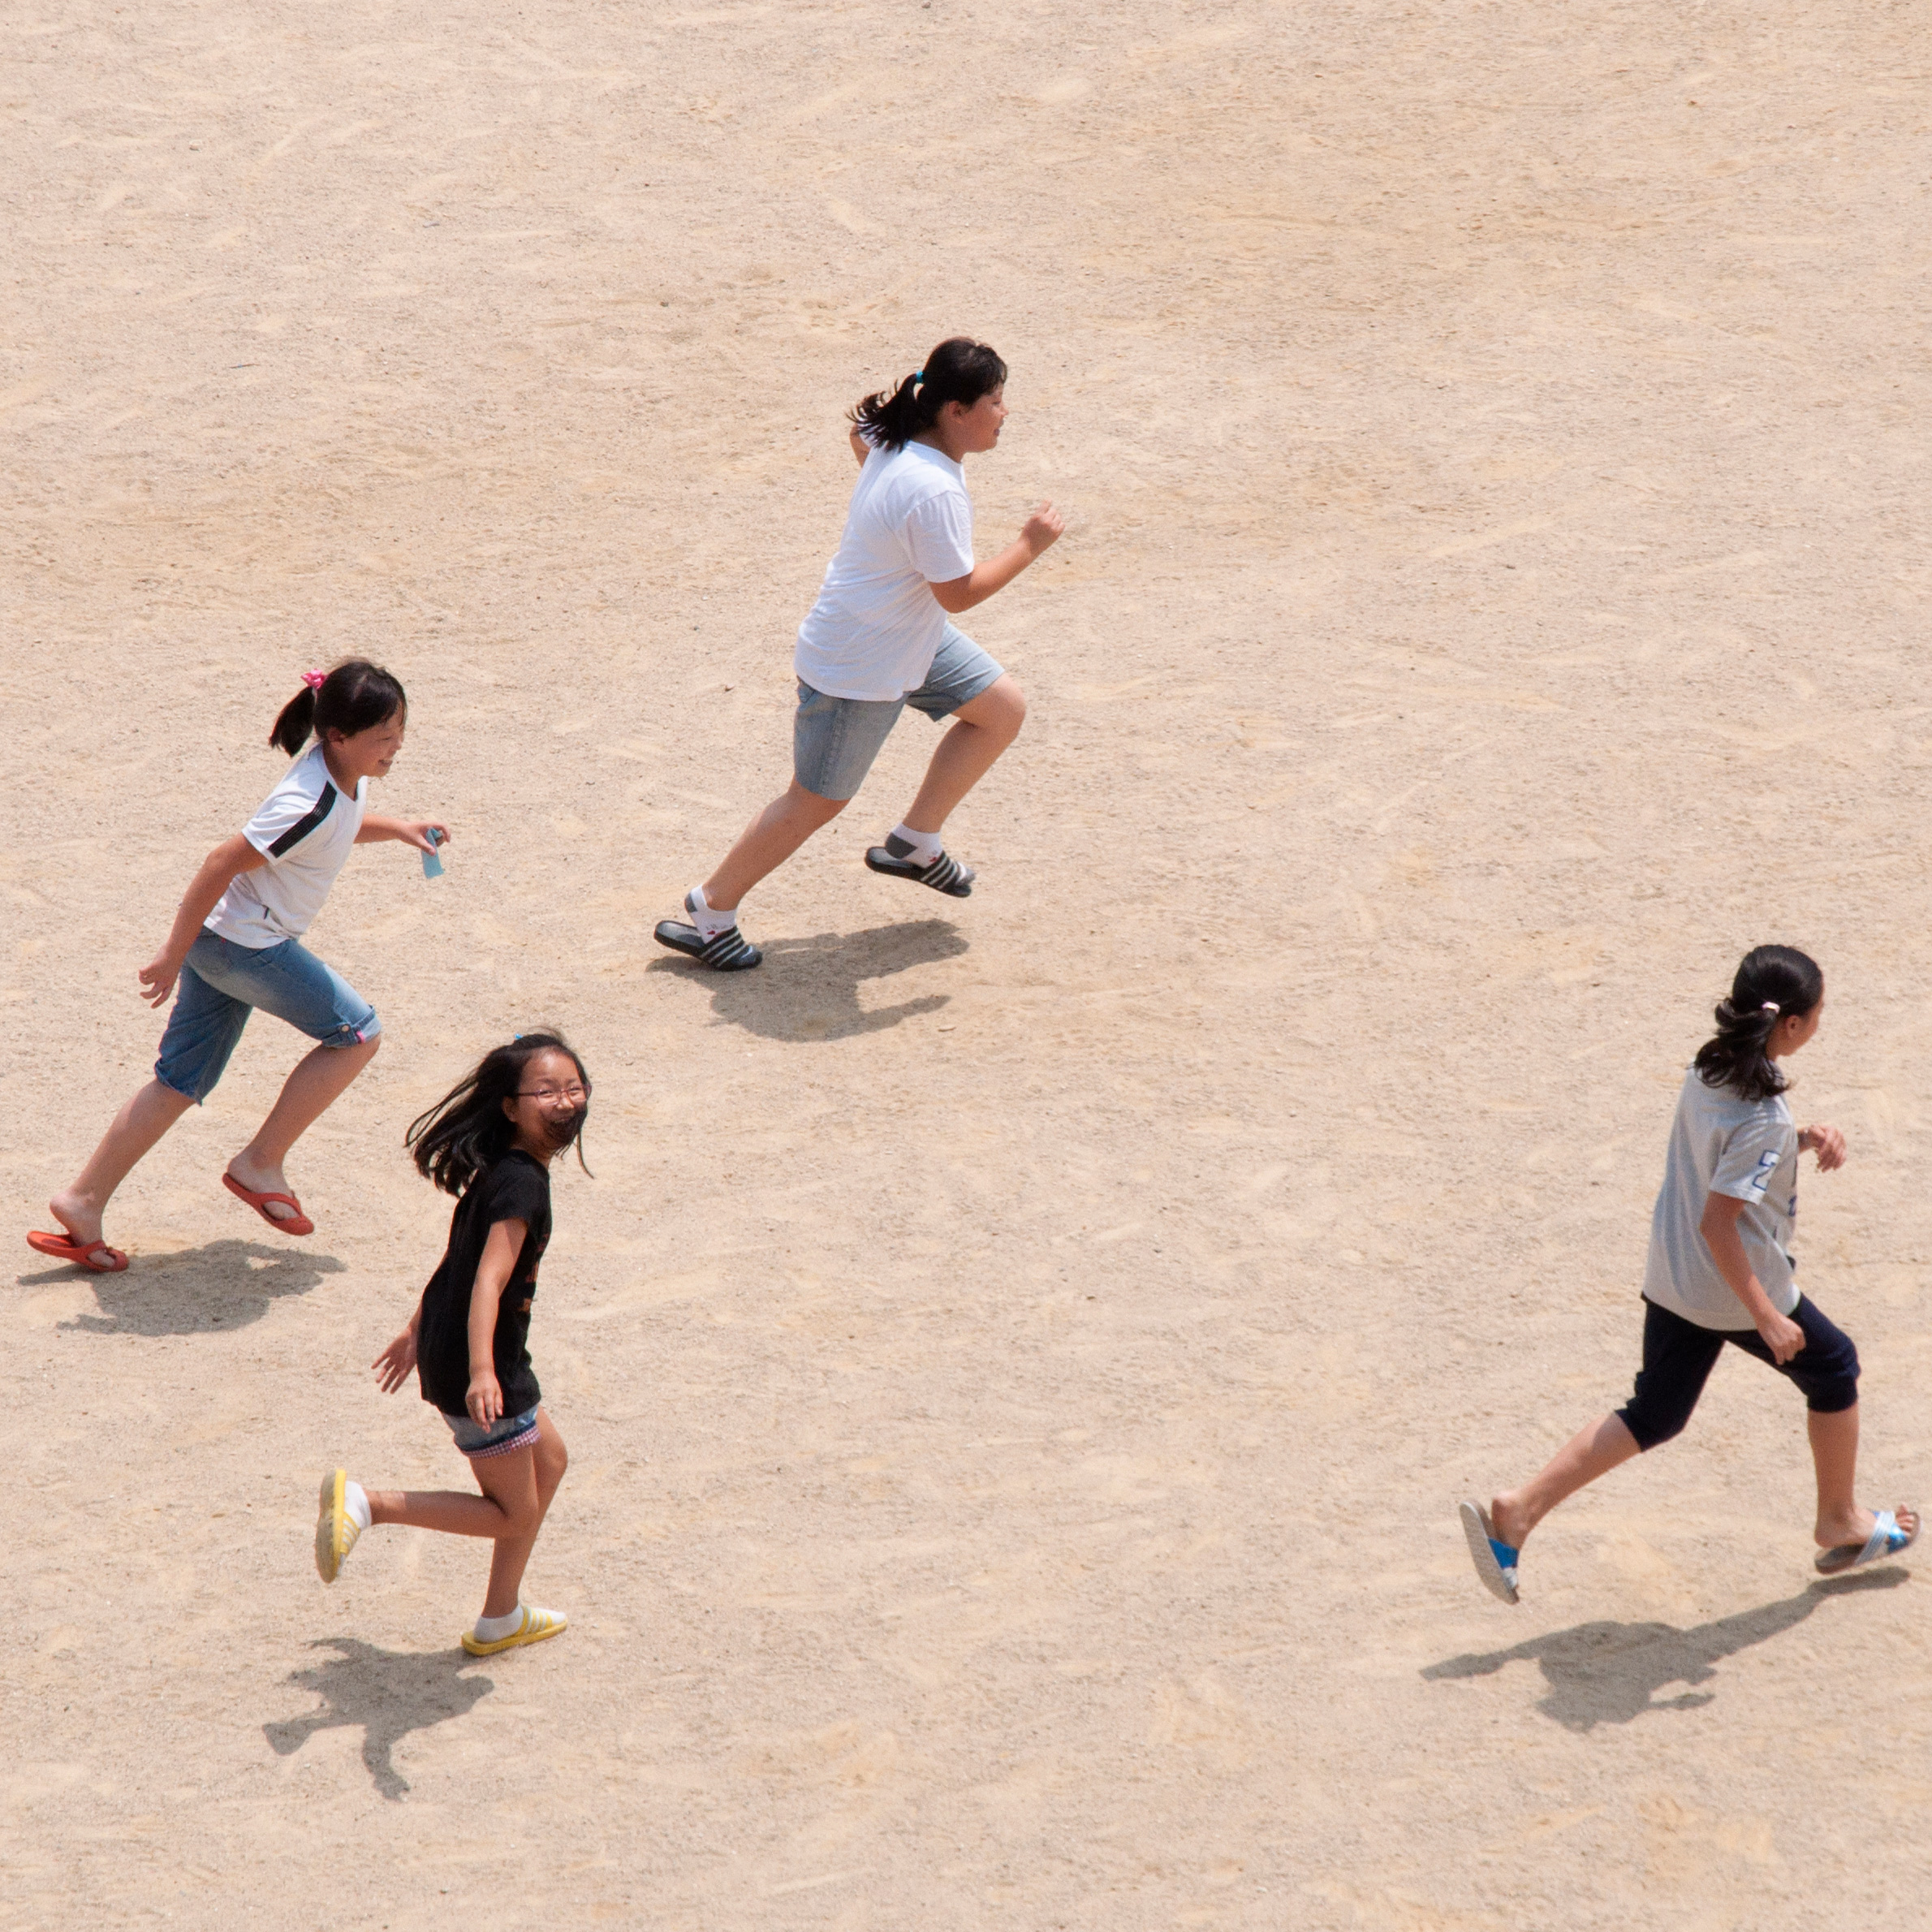 A group of students running in a schoolyard.